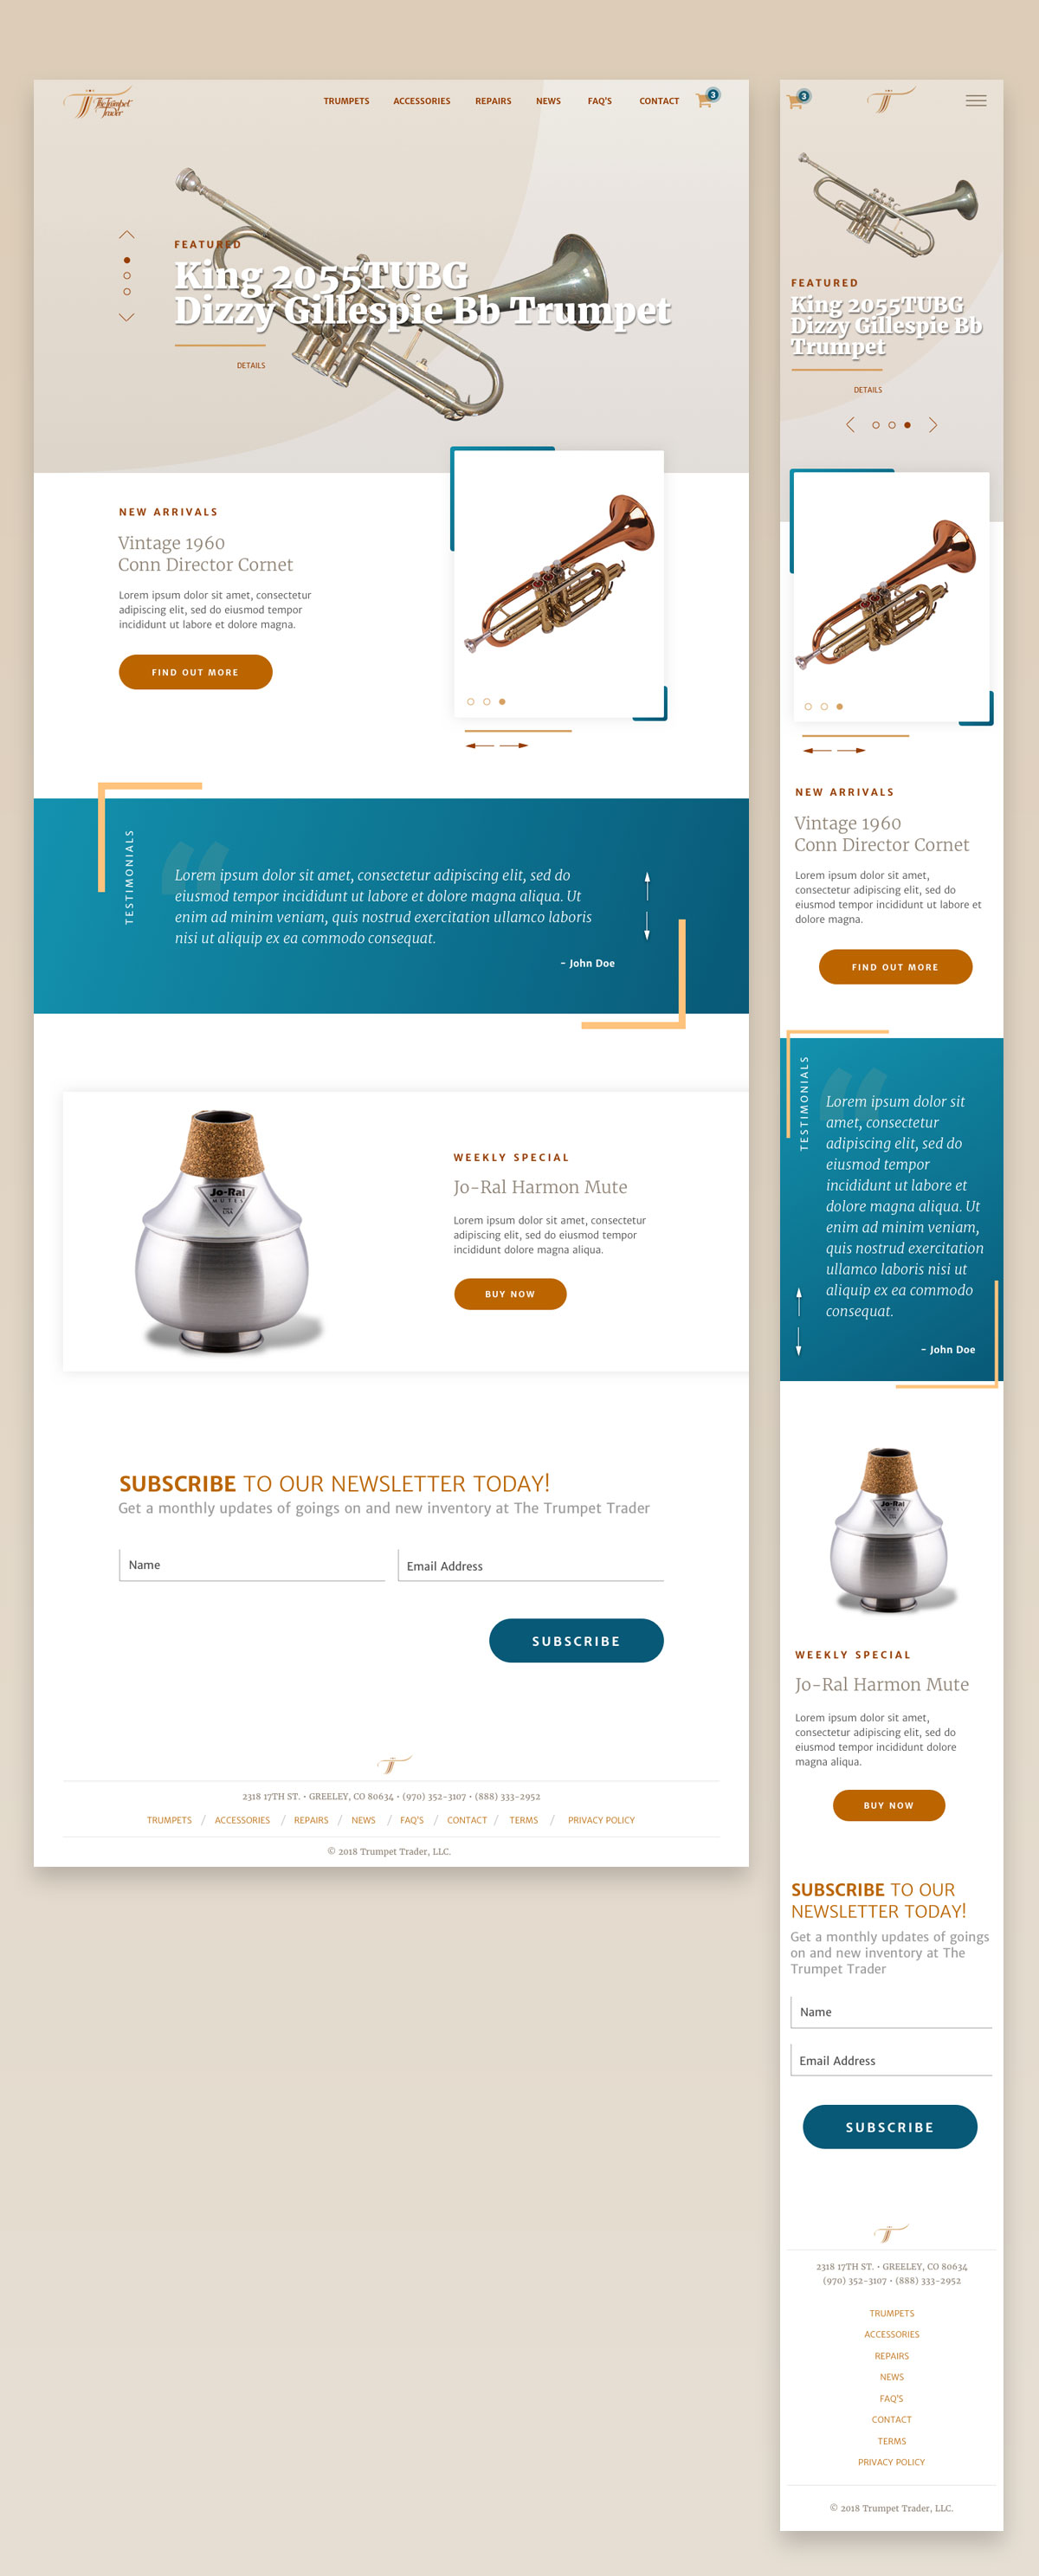 Home page concept for the Trumpet Trader website.